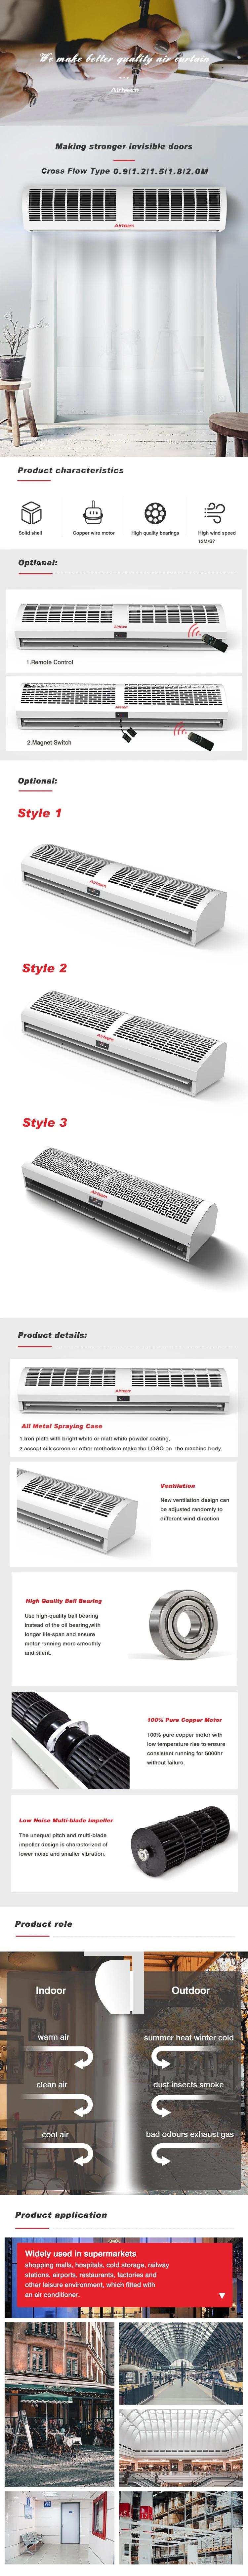 1200mm Residential and Commercial Door Air Isolation Cross Flow Air Curtain